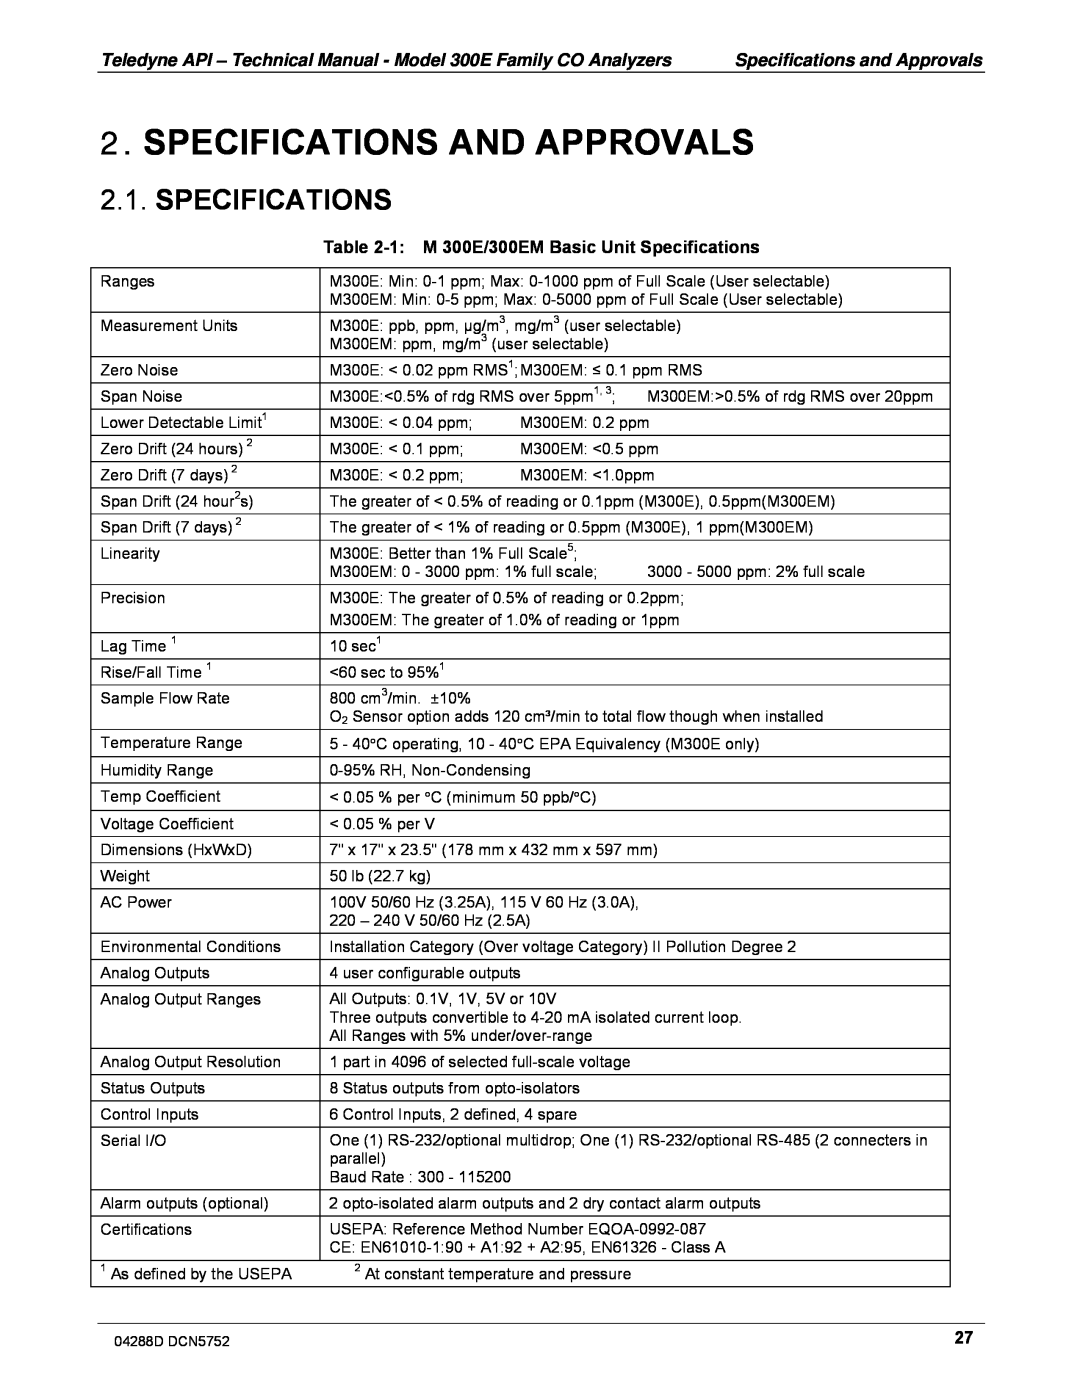 Teledyne M300EM operation manual Specifications And Approvals, 1:M 300E/300EM Basic Unit Specifications 